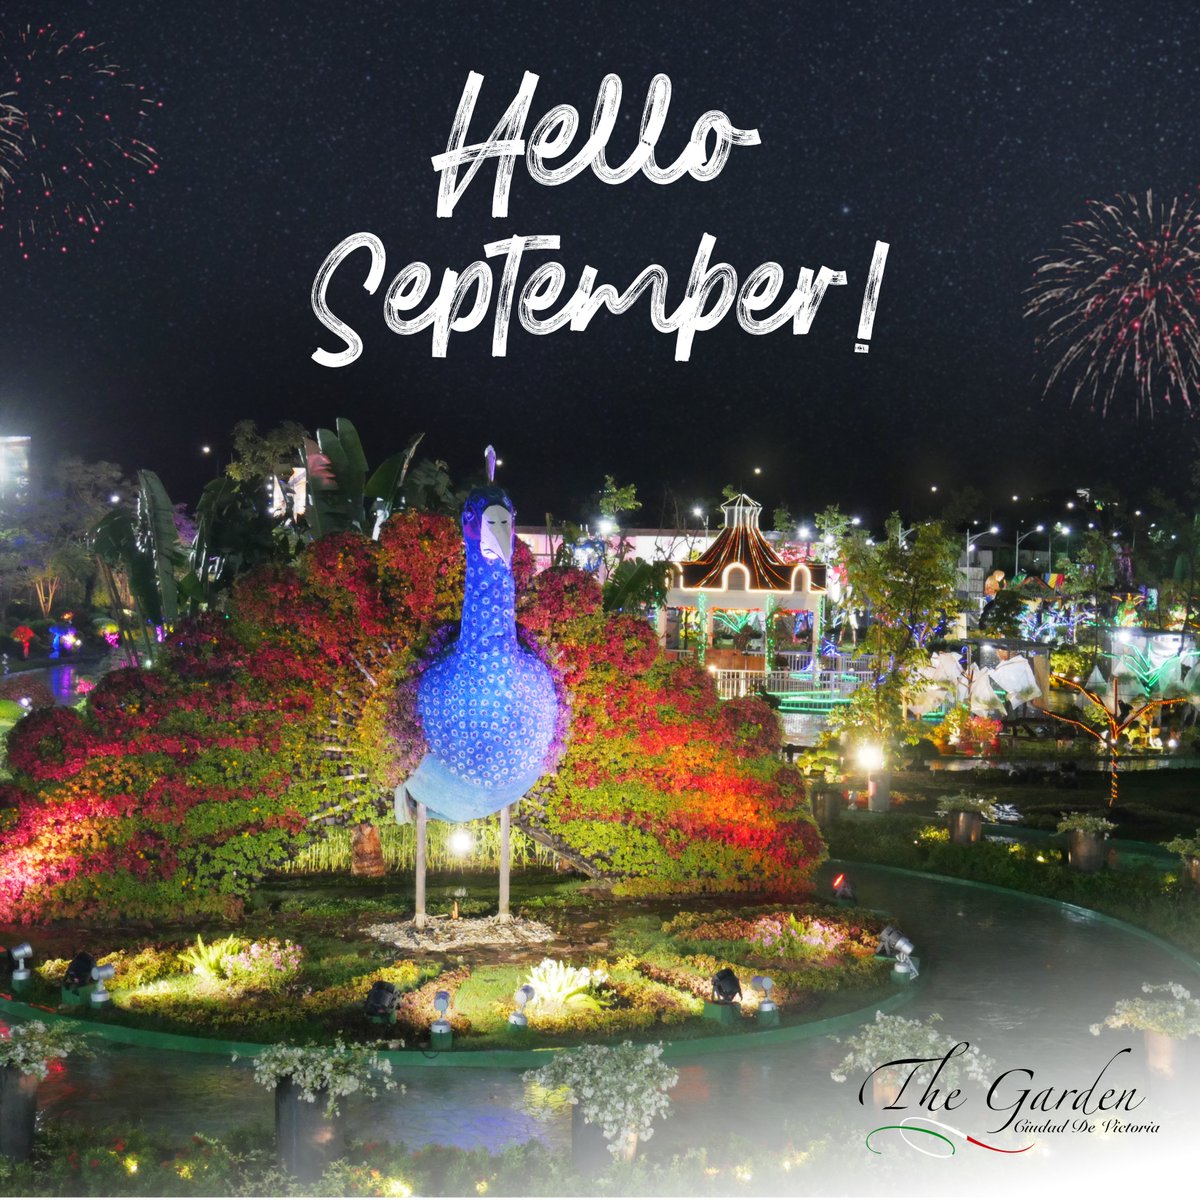 Start September with something you'll remember! 🎆 Cold season is just around the corner. 😊😄